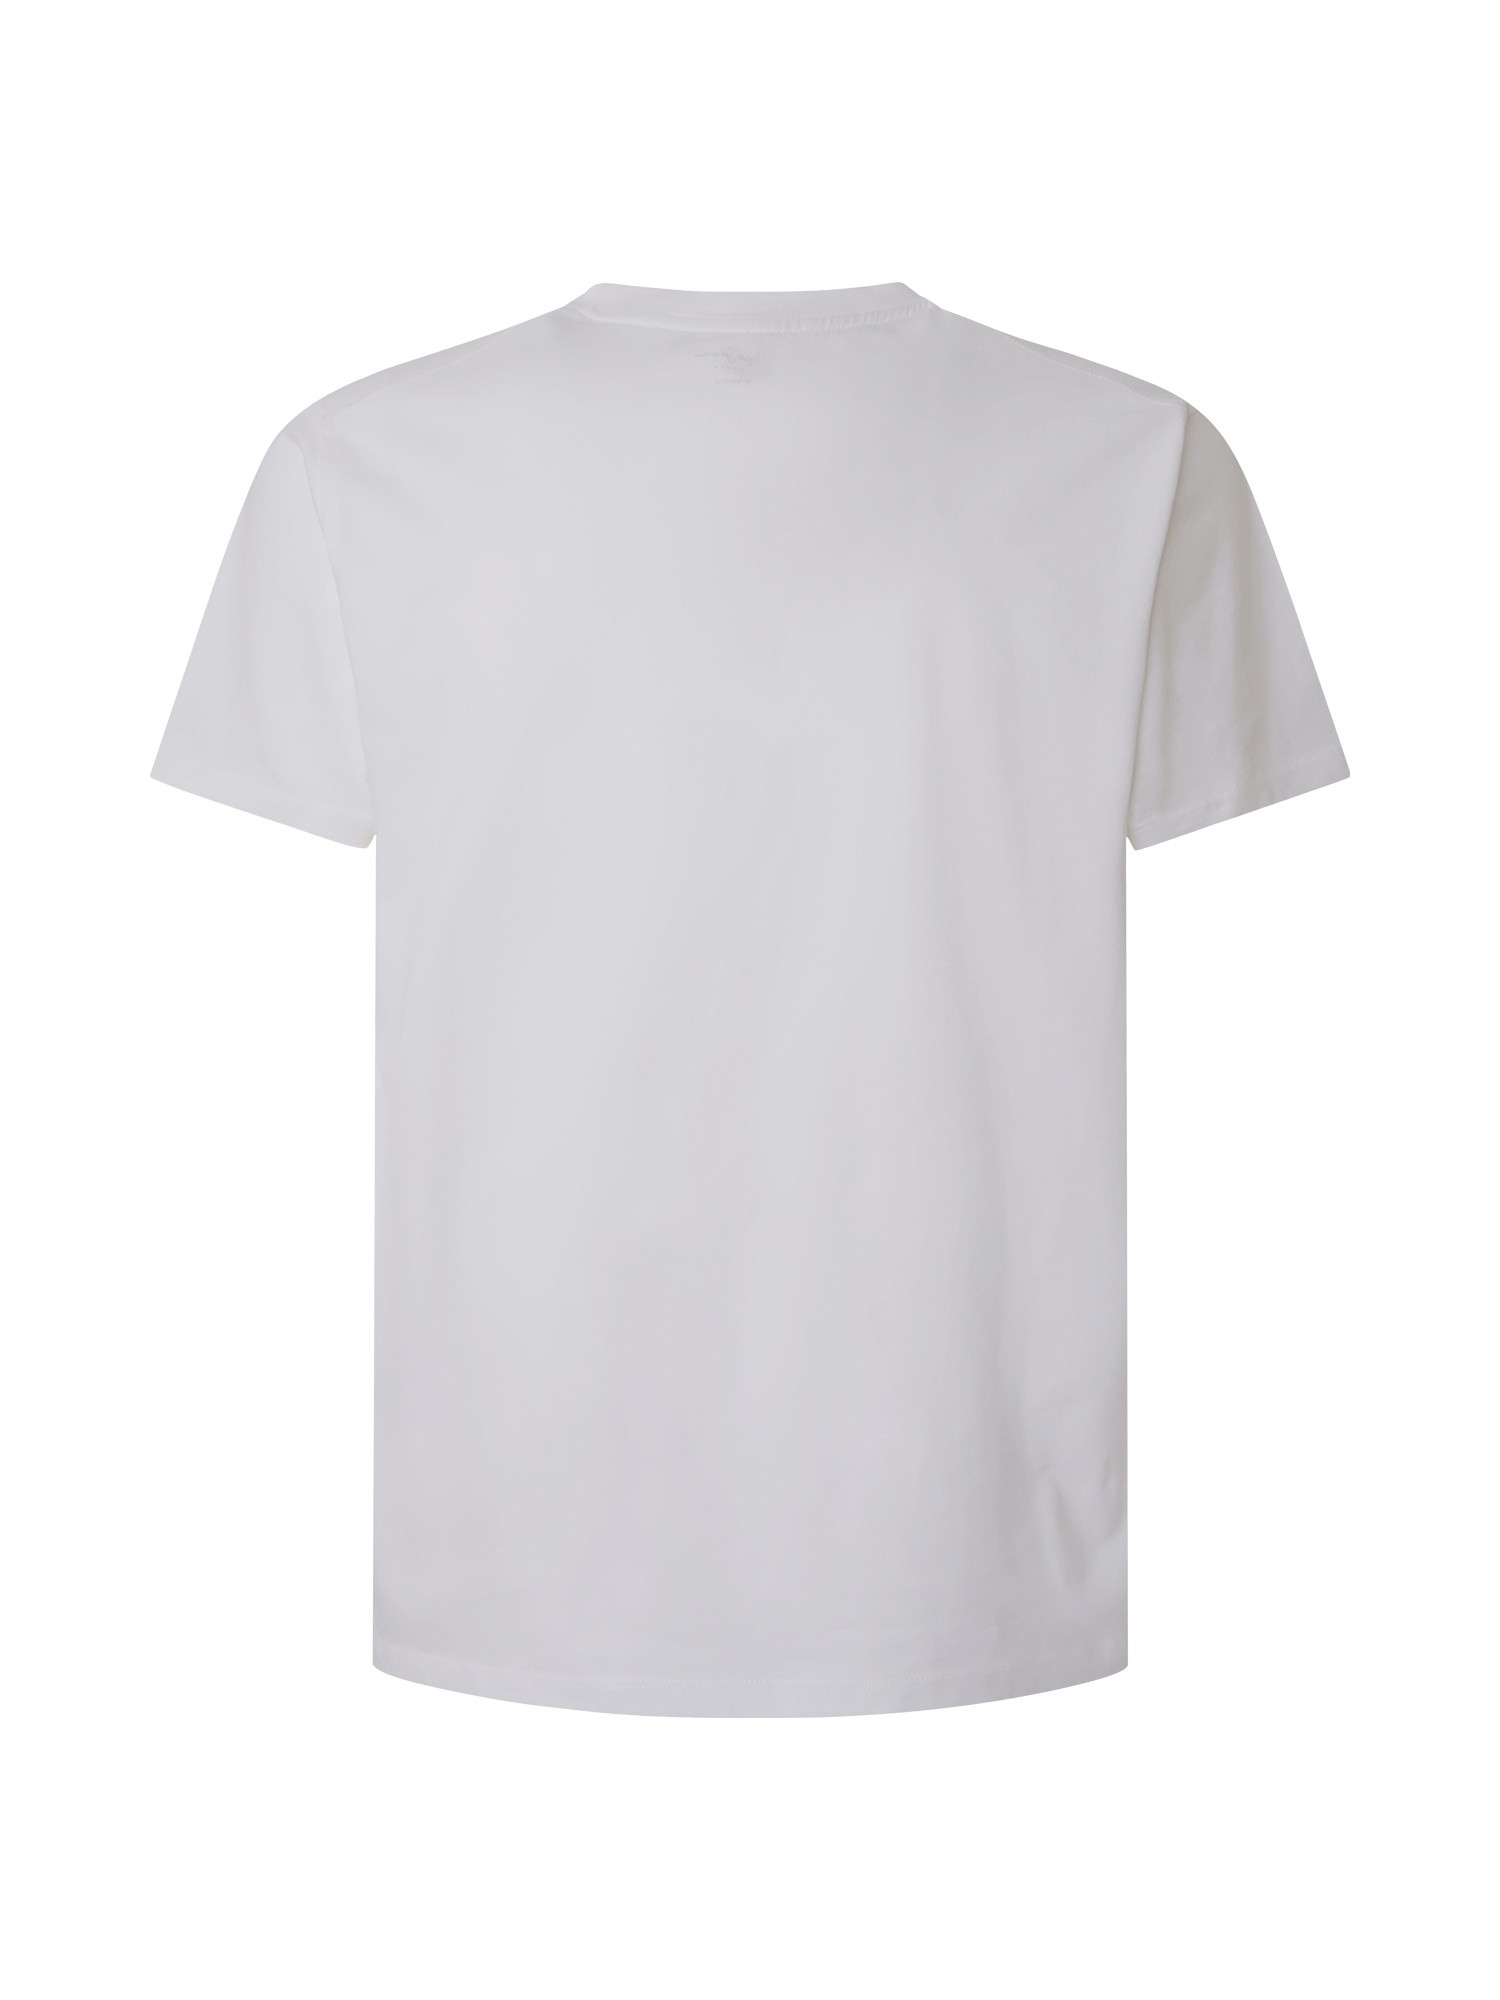 Pepe Jeans - T-shirt con scritta in cotone, Bianco, large image number 1